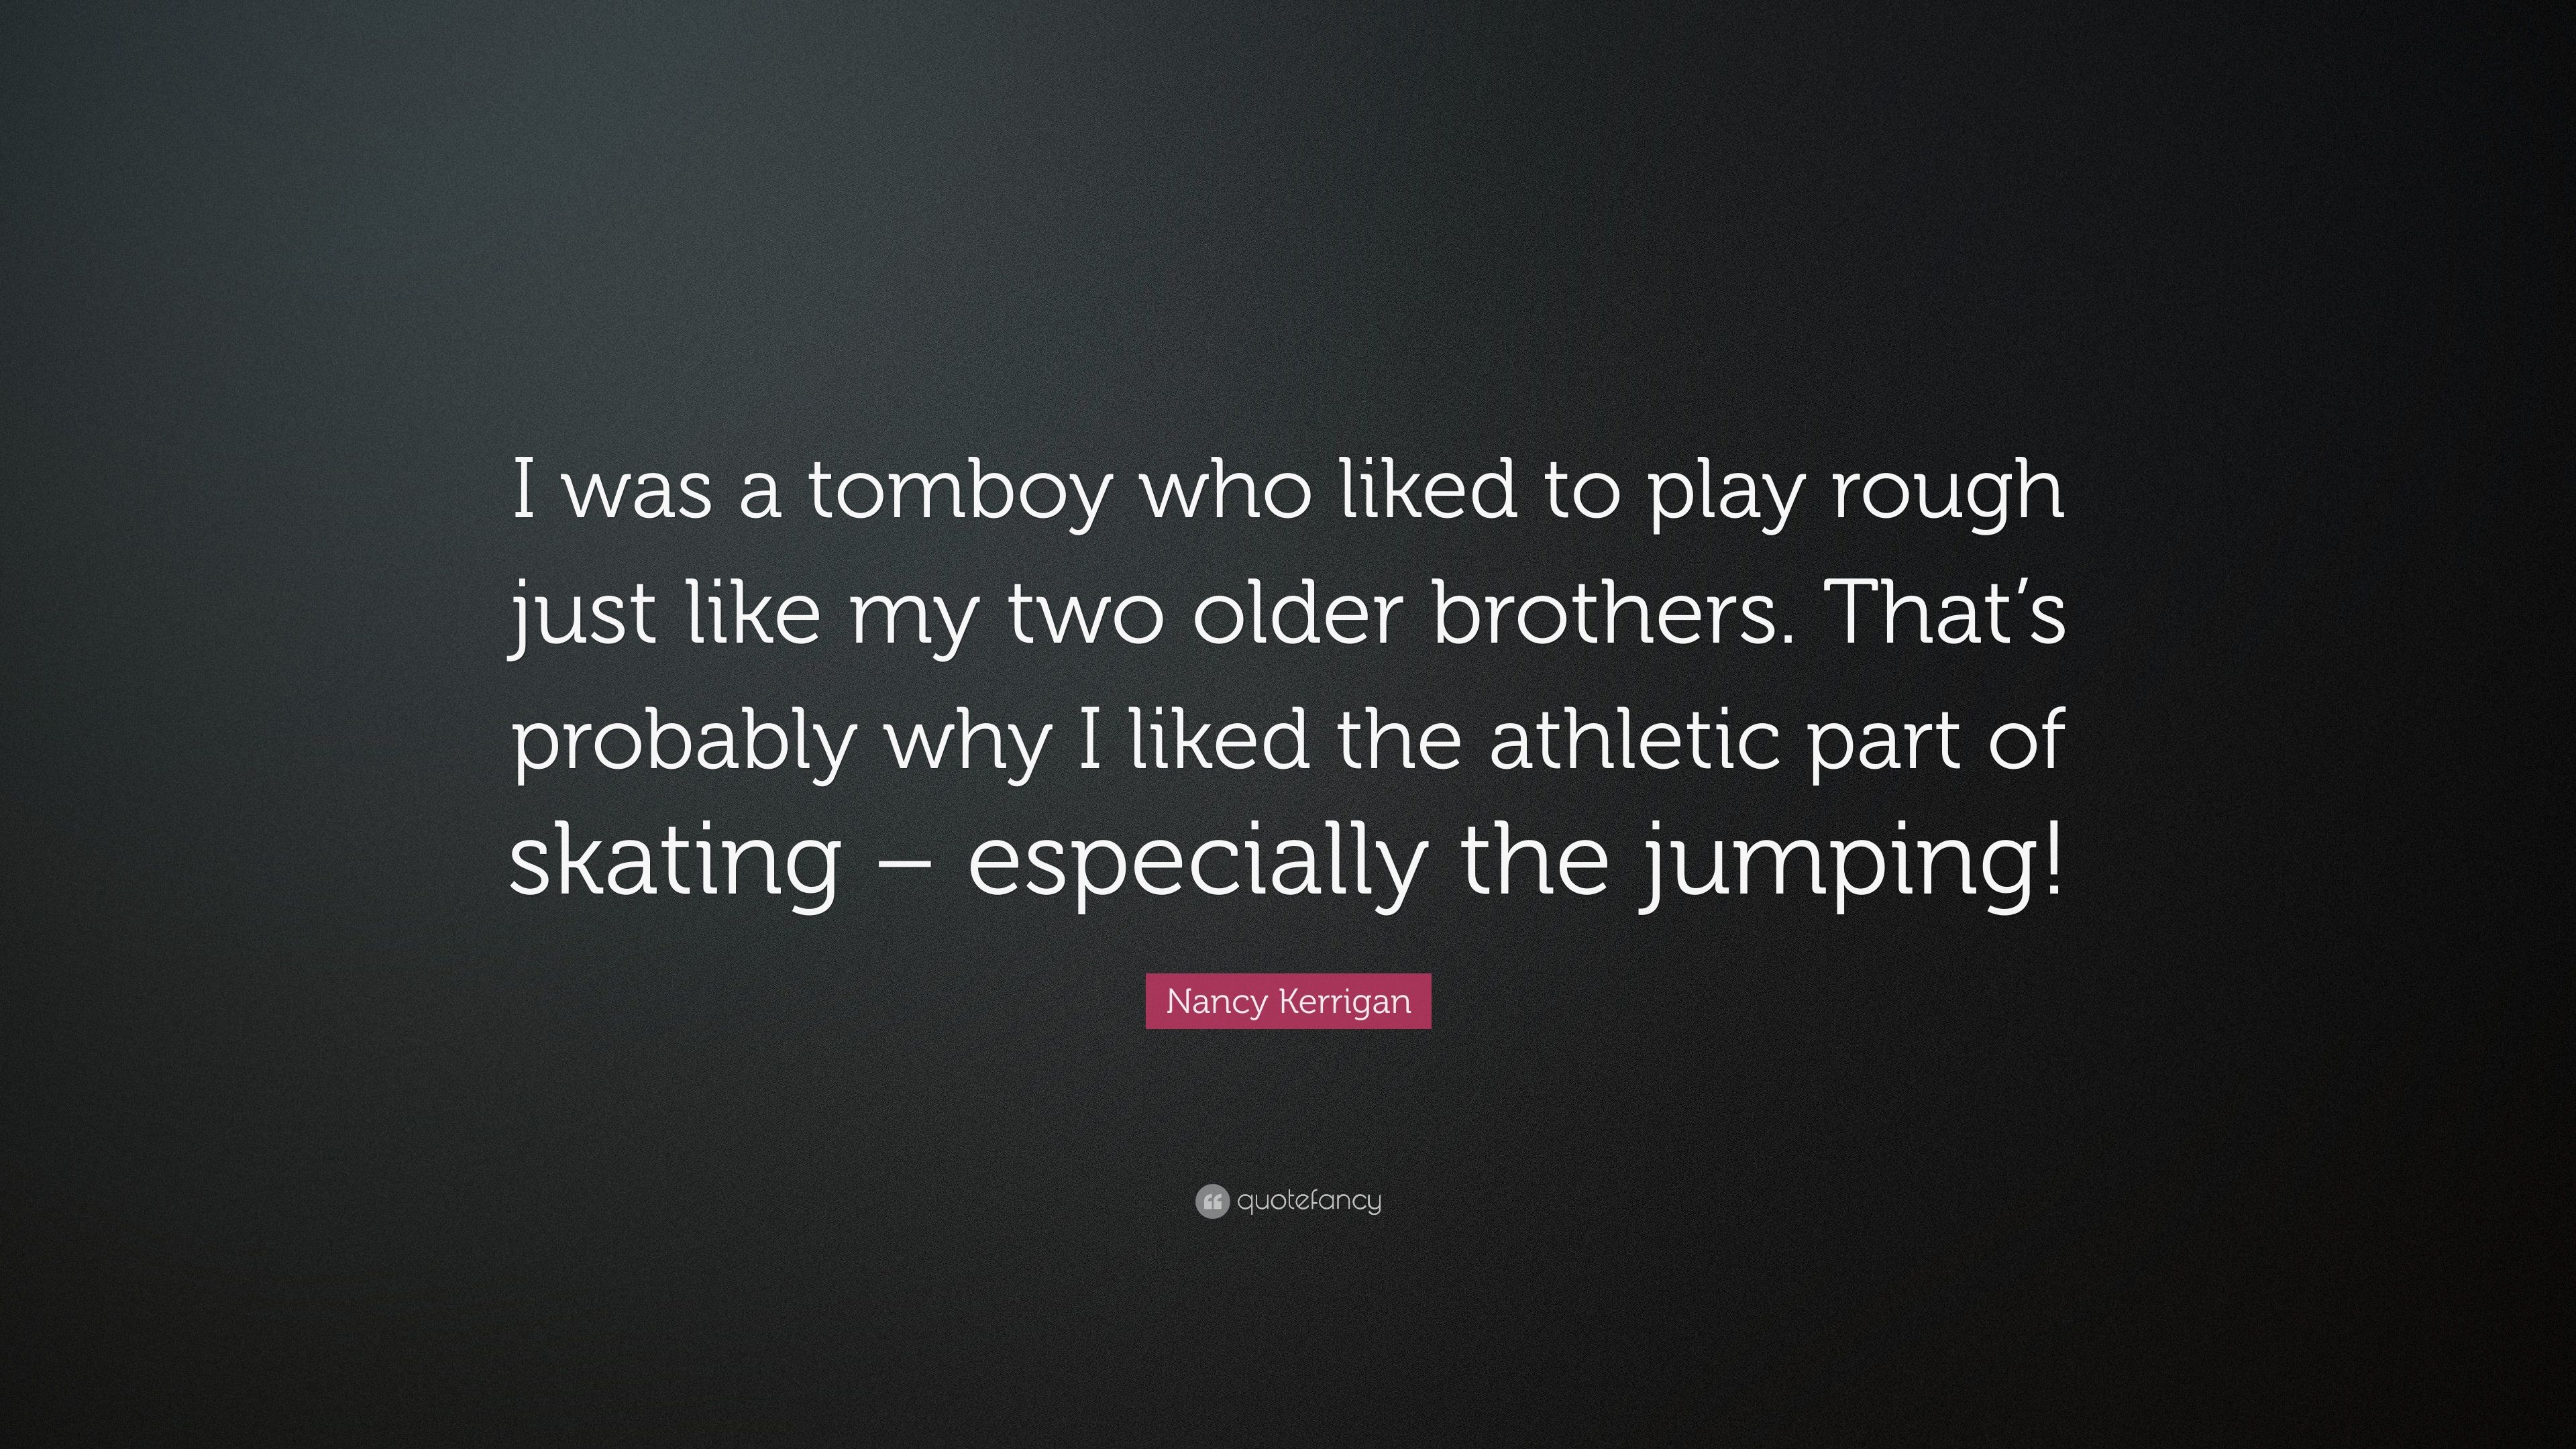 Nancy Kerrigan Quote: “I was a tomboy who liked to play rough just